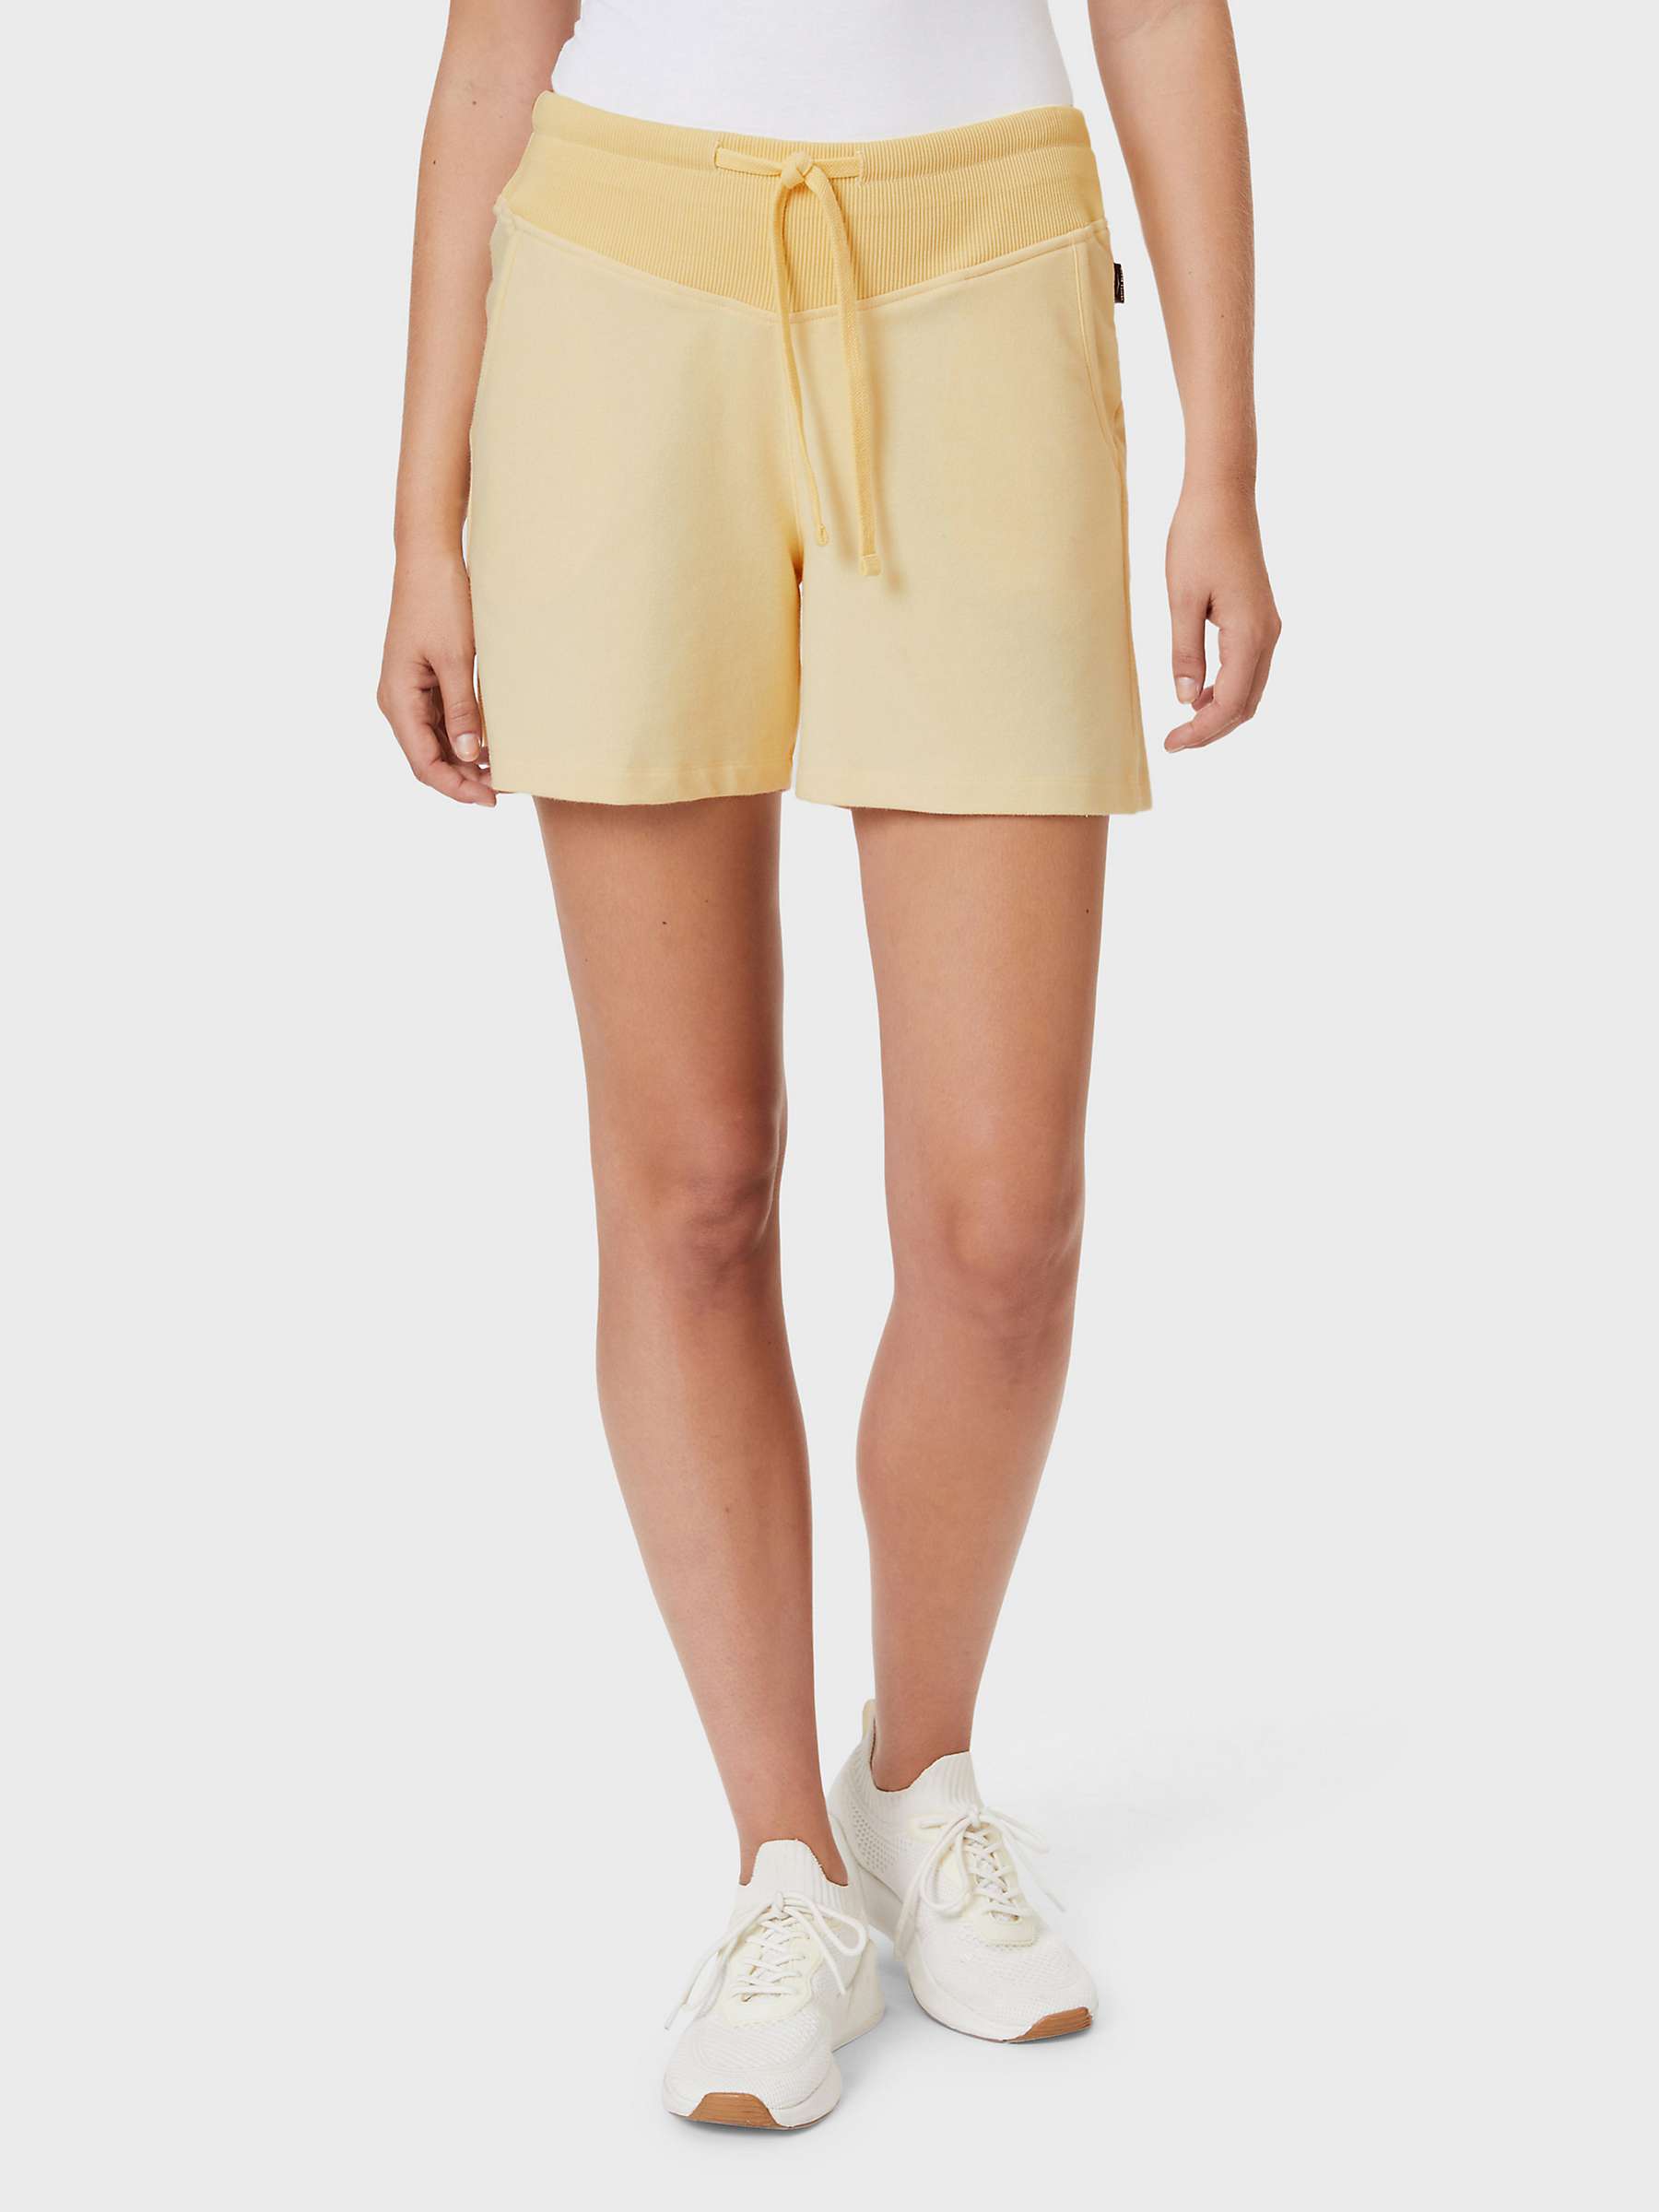 Buy Venice Beach Morla Relaxed Fit Sweat Shorts Online at johnlewis.com